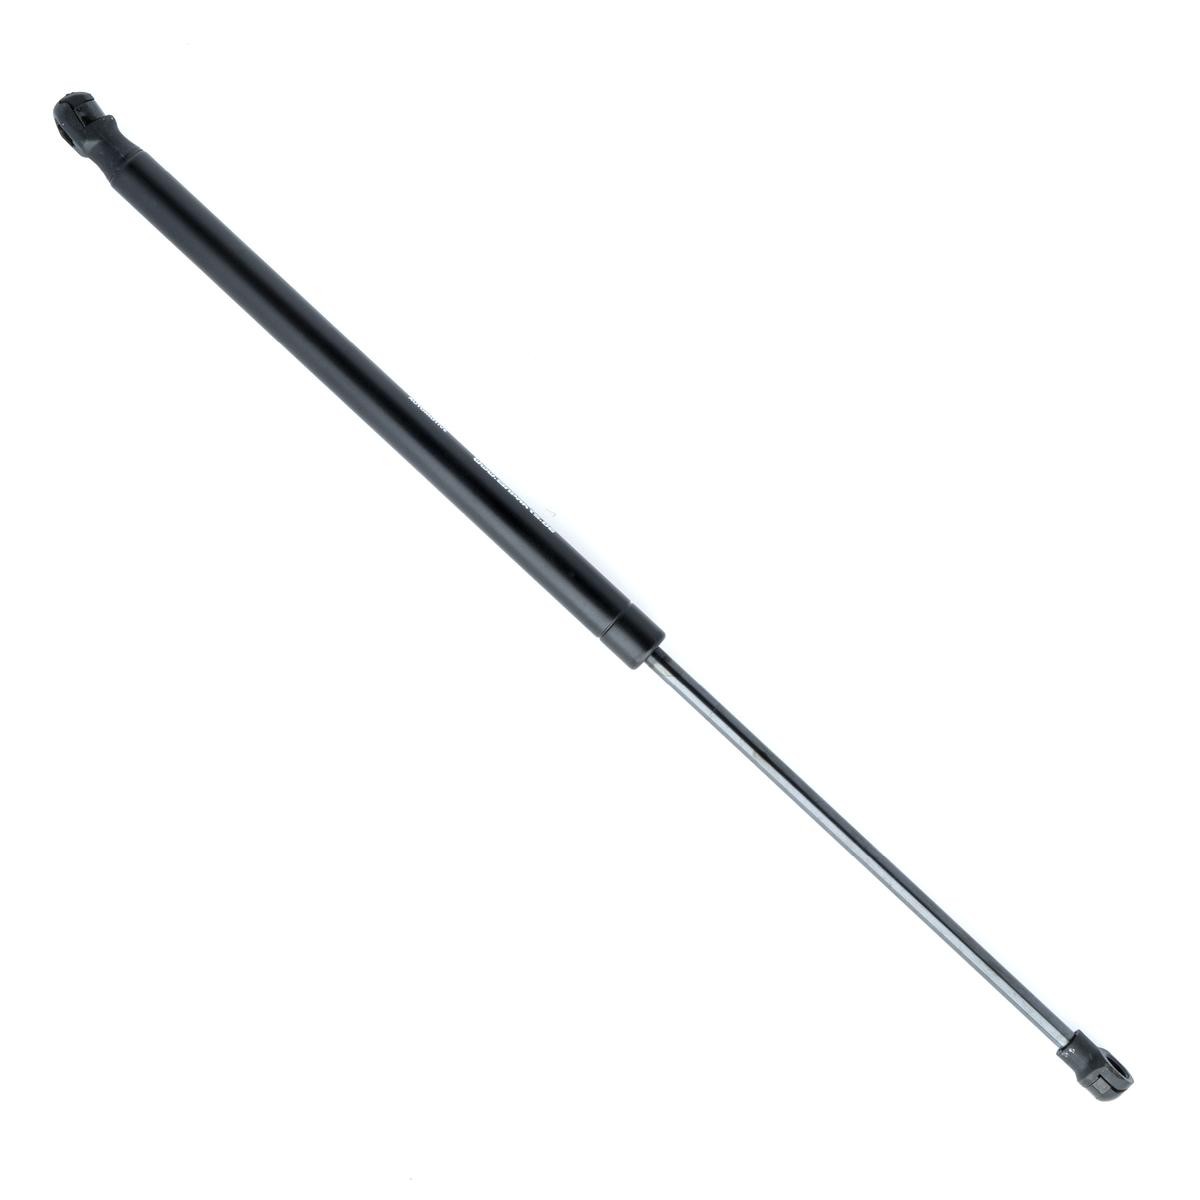 GS0237 EINPARTS 635N, 500 mm Stroke: 200mm Gas spring, boot- / cargo area EP9105GS buy